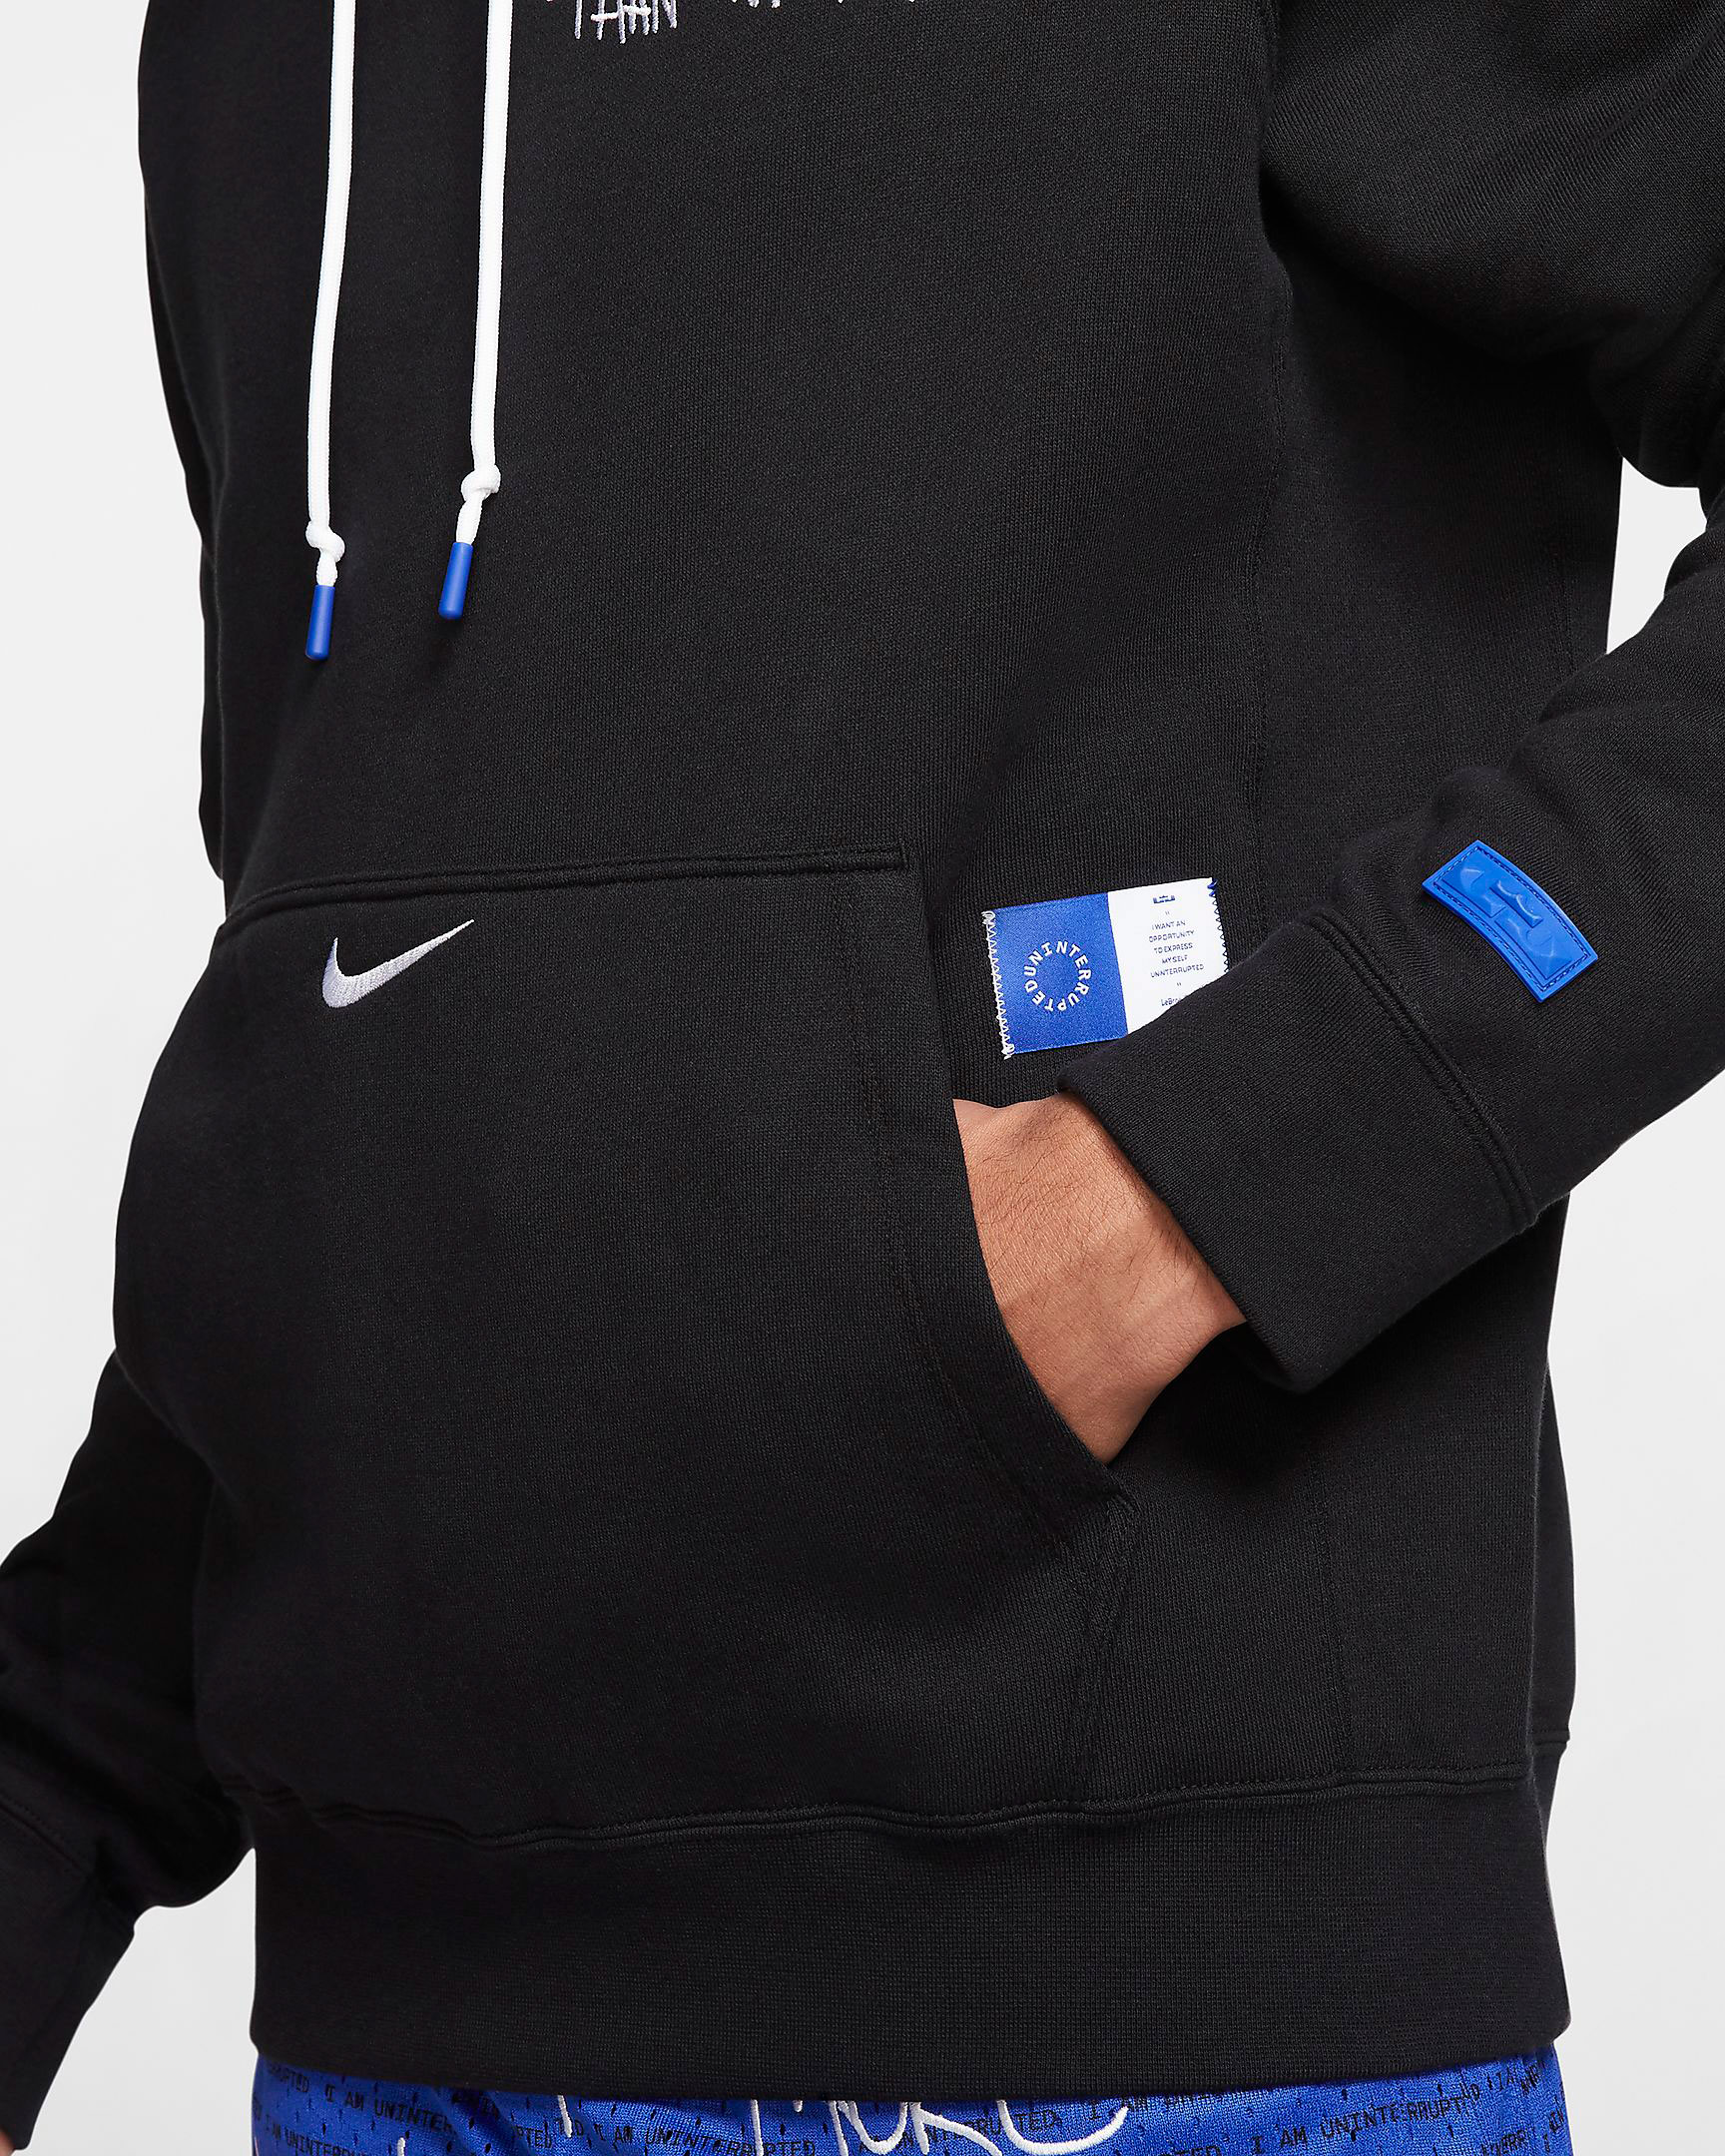 nike-lebron-more-than-an-athlete-uninterrupted-hoodie-3